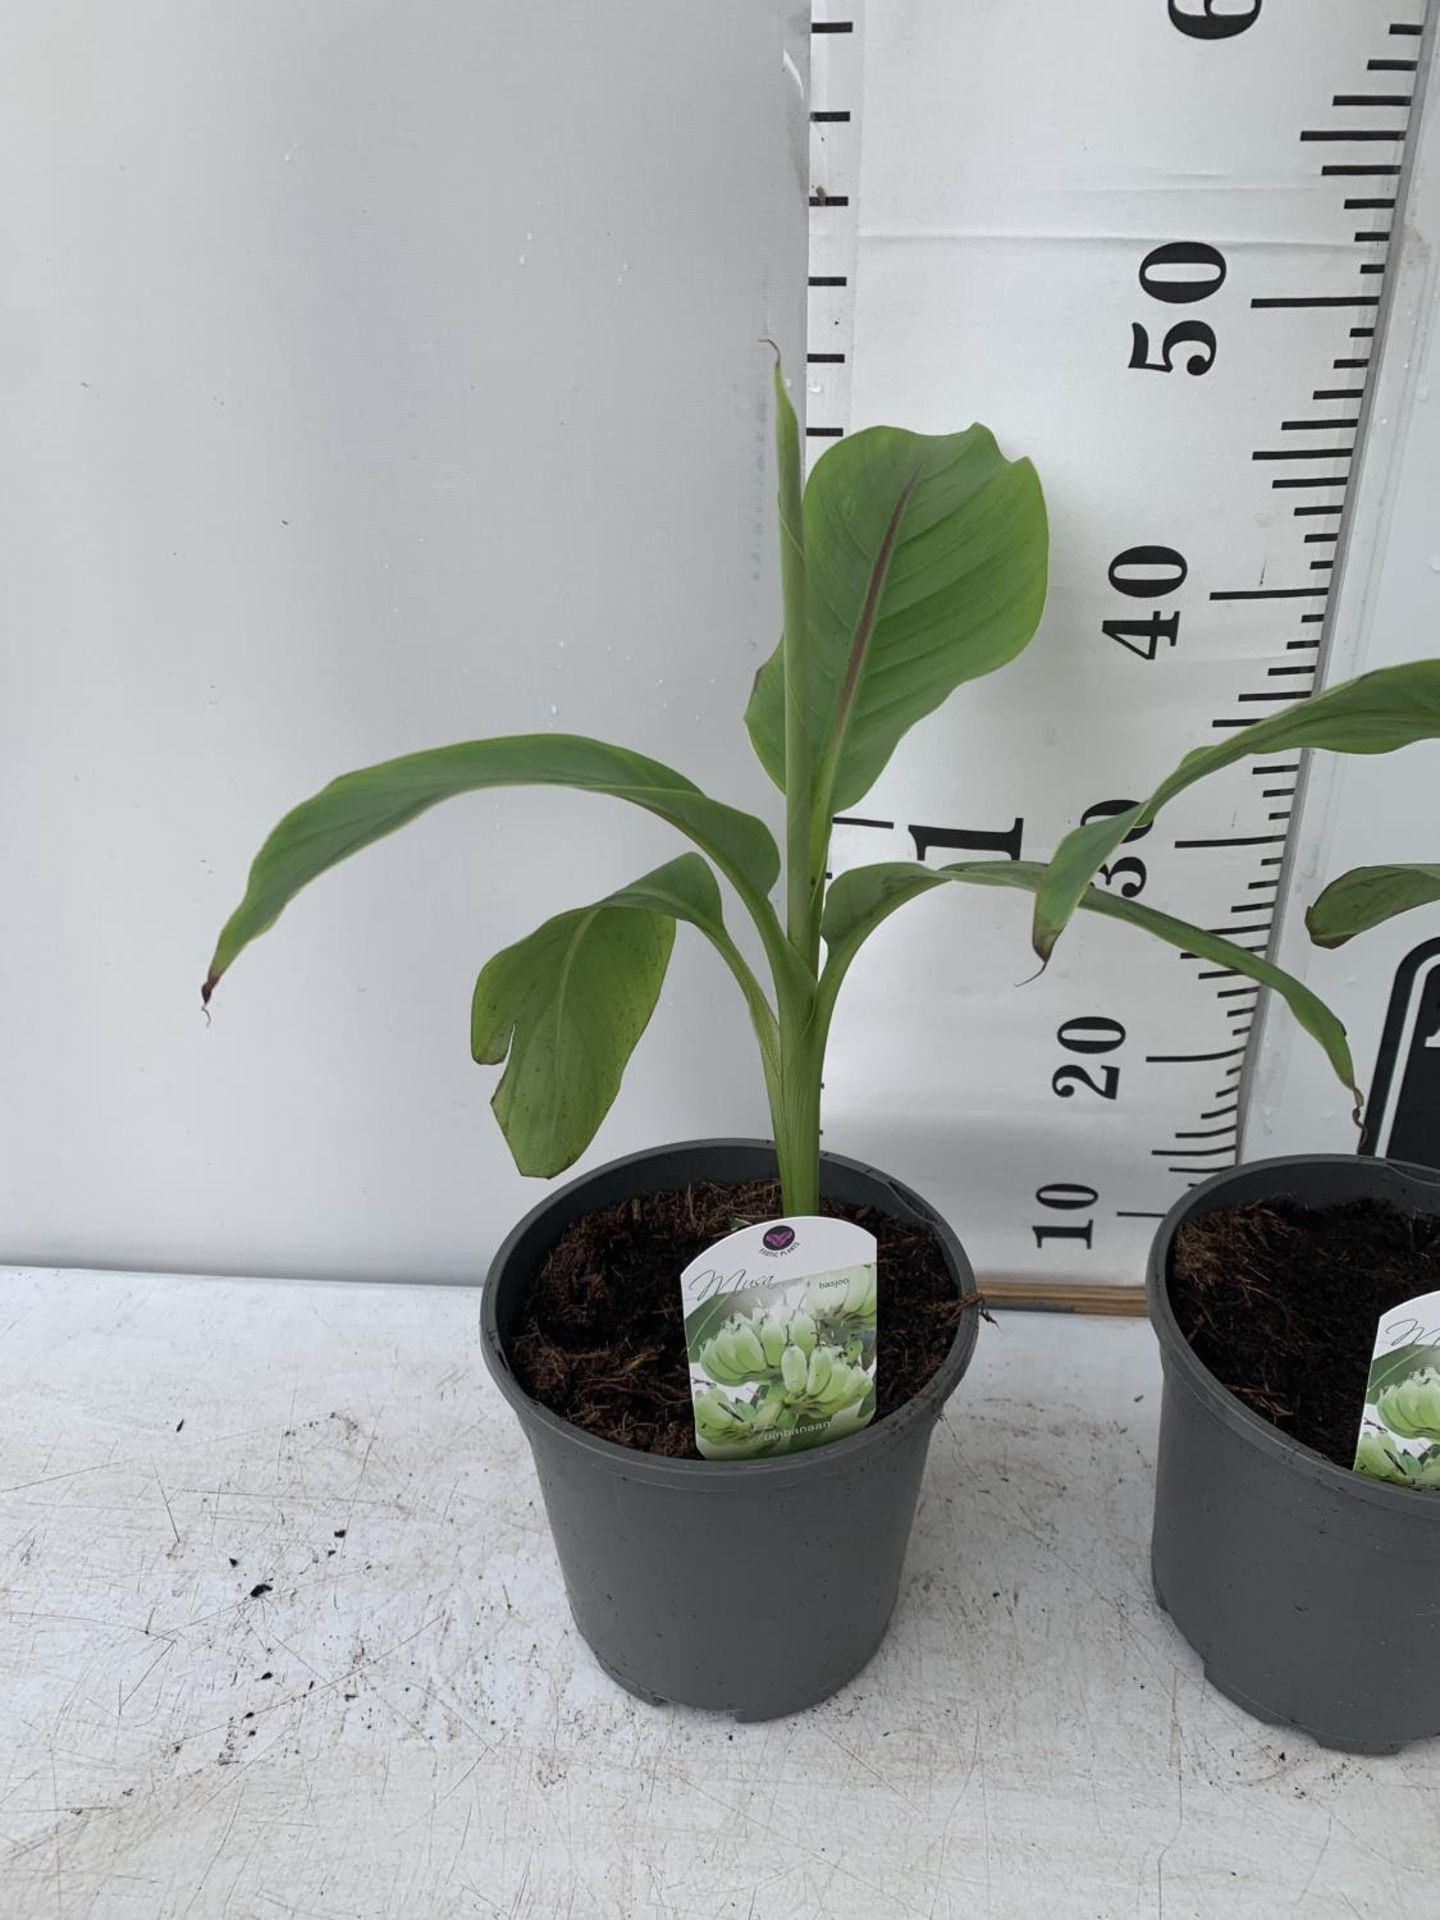 TWO MUSA BASJOO BANANA PLANTS IN 2 LTR POTS 35CM TALL TO BE SOLD FOR THE TWO NO VAT - Image 2 of 5